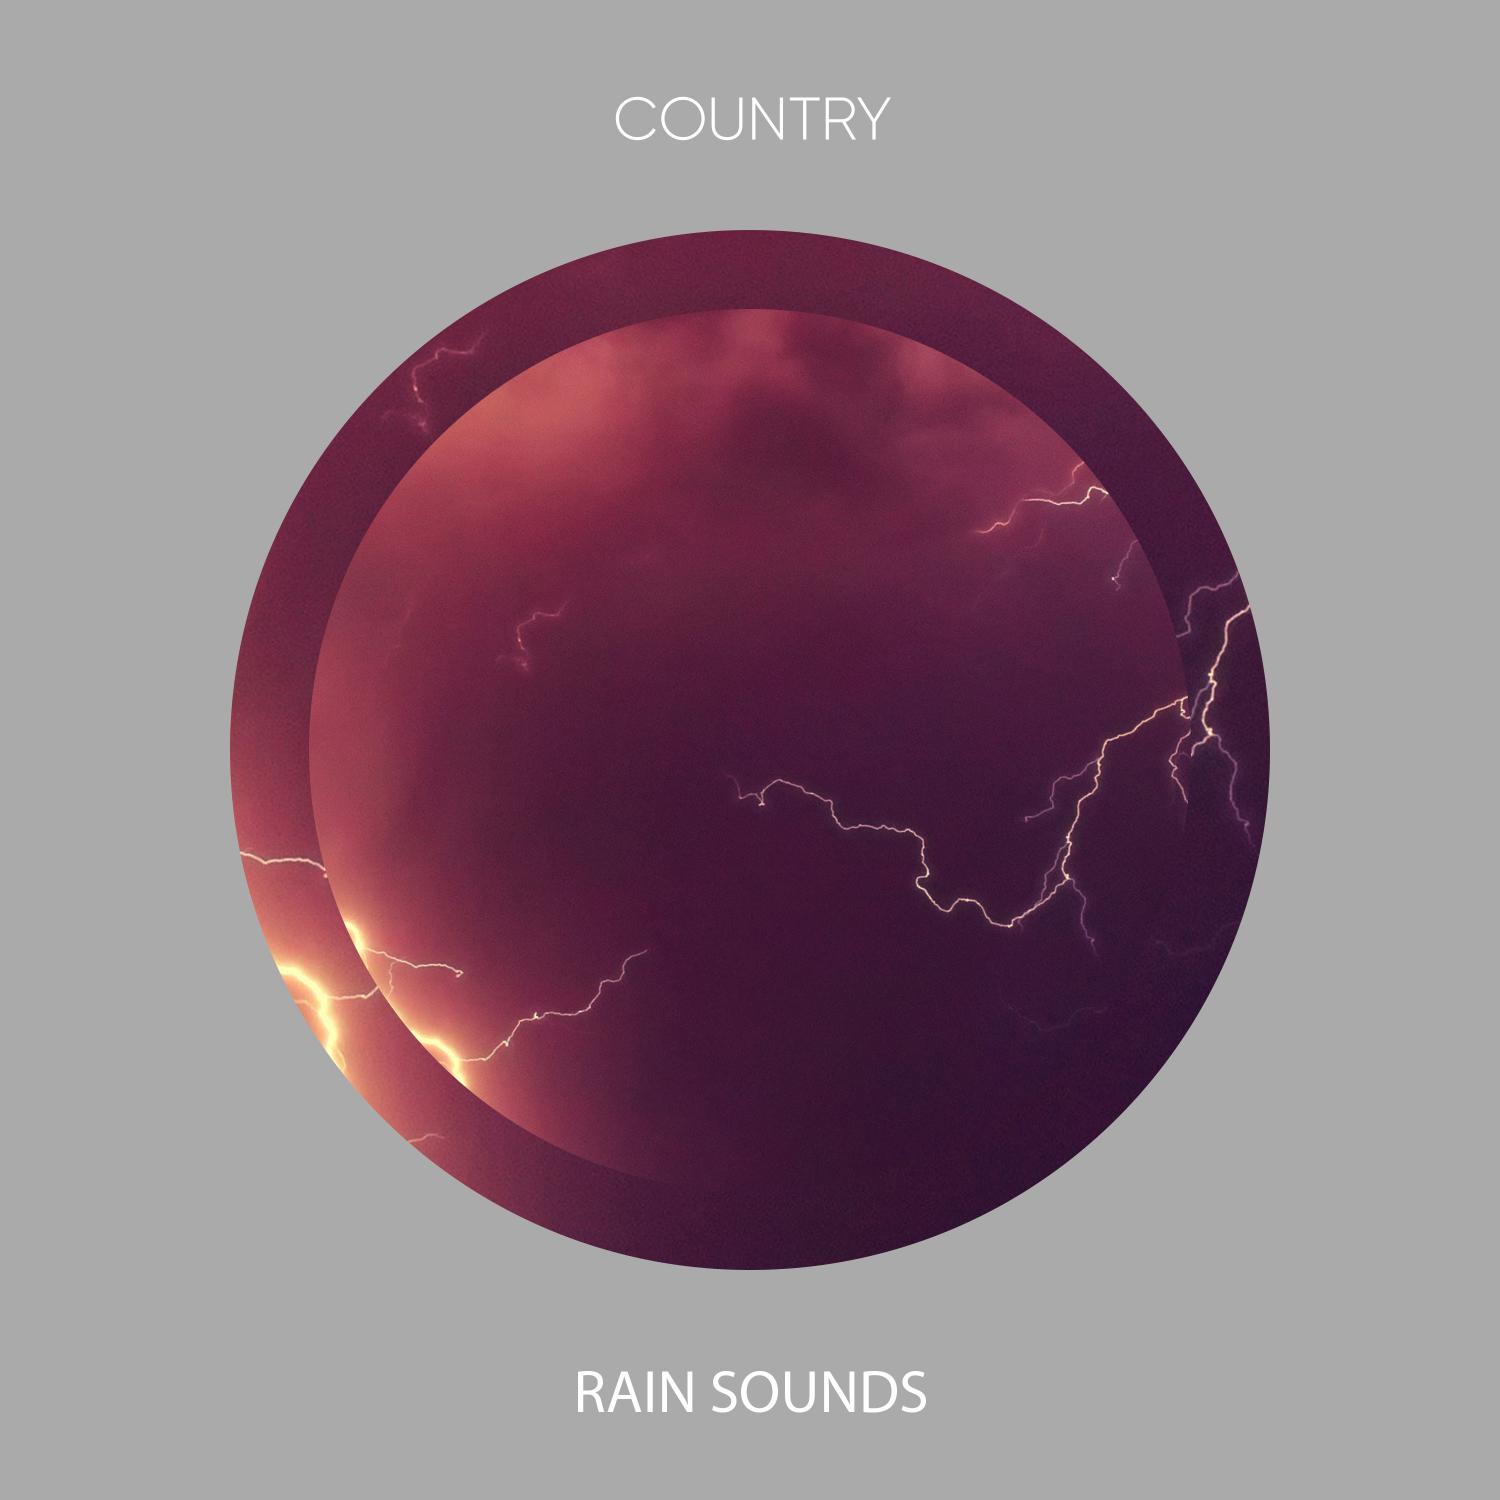 20 Country RainSounds for Peaceful Night Sleep